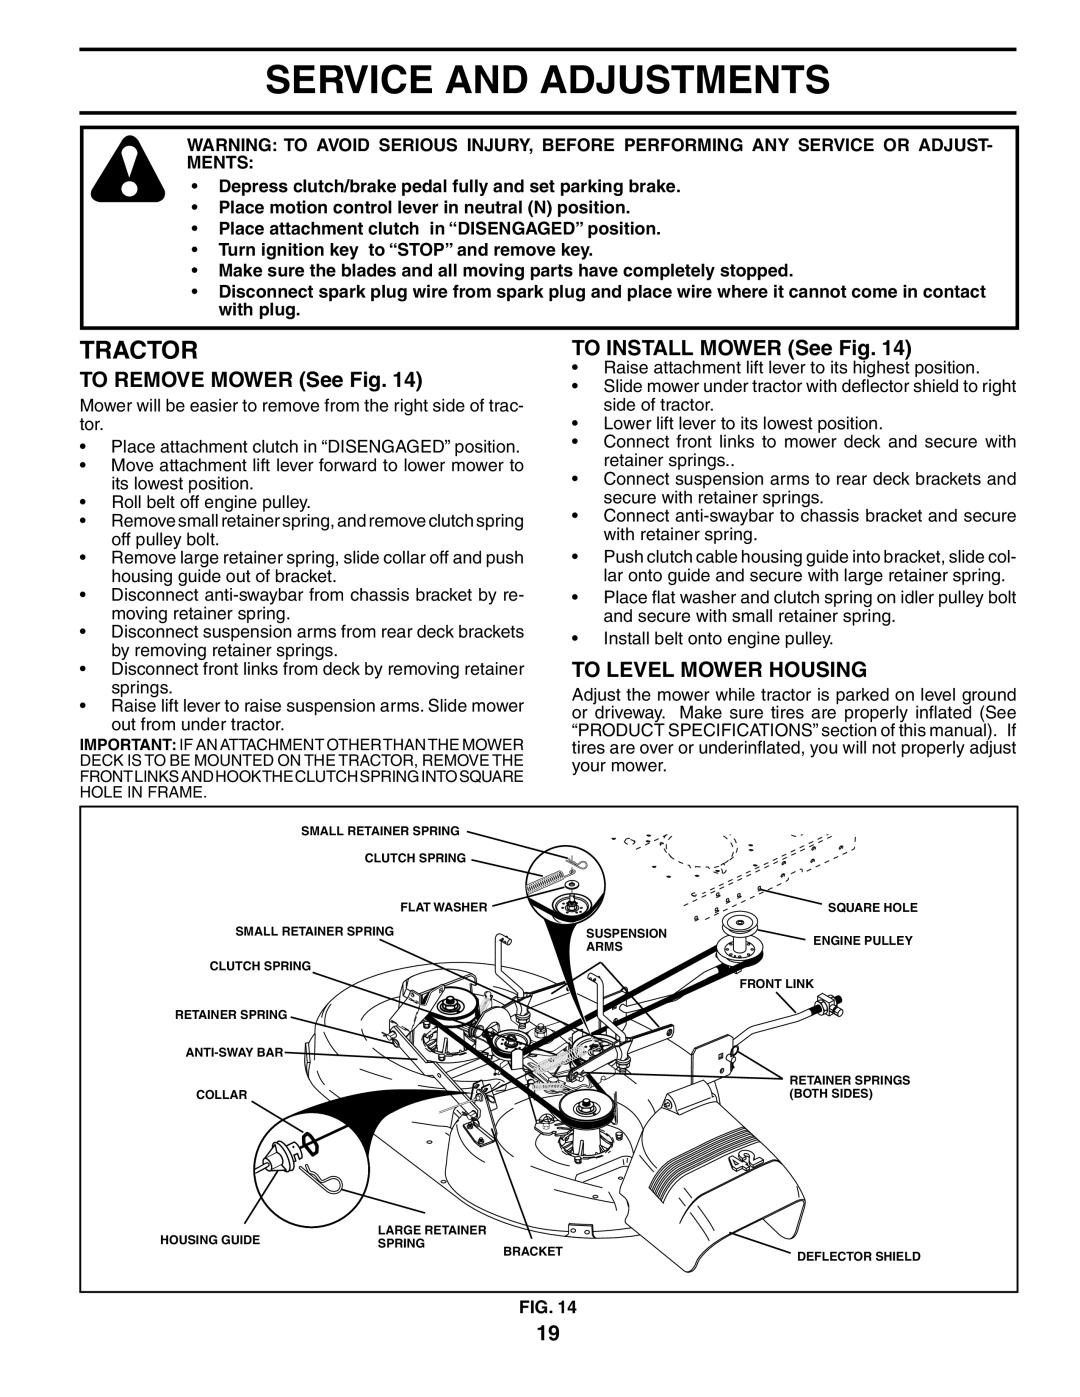 Poulan 197022 manual Service and Adjustments, To Remove Mower See Fig, To Install Mower See Fig, To Level Mower Housing 